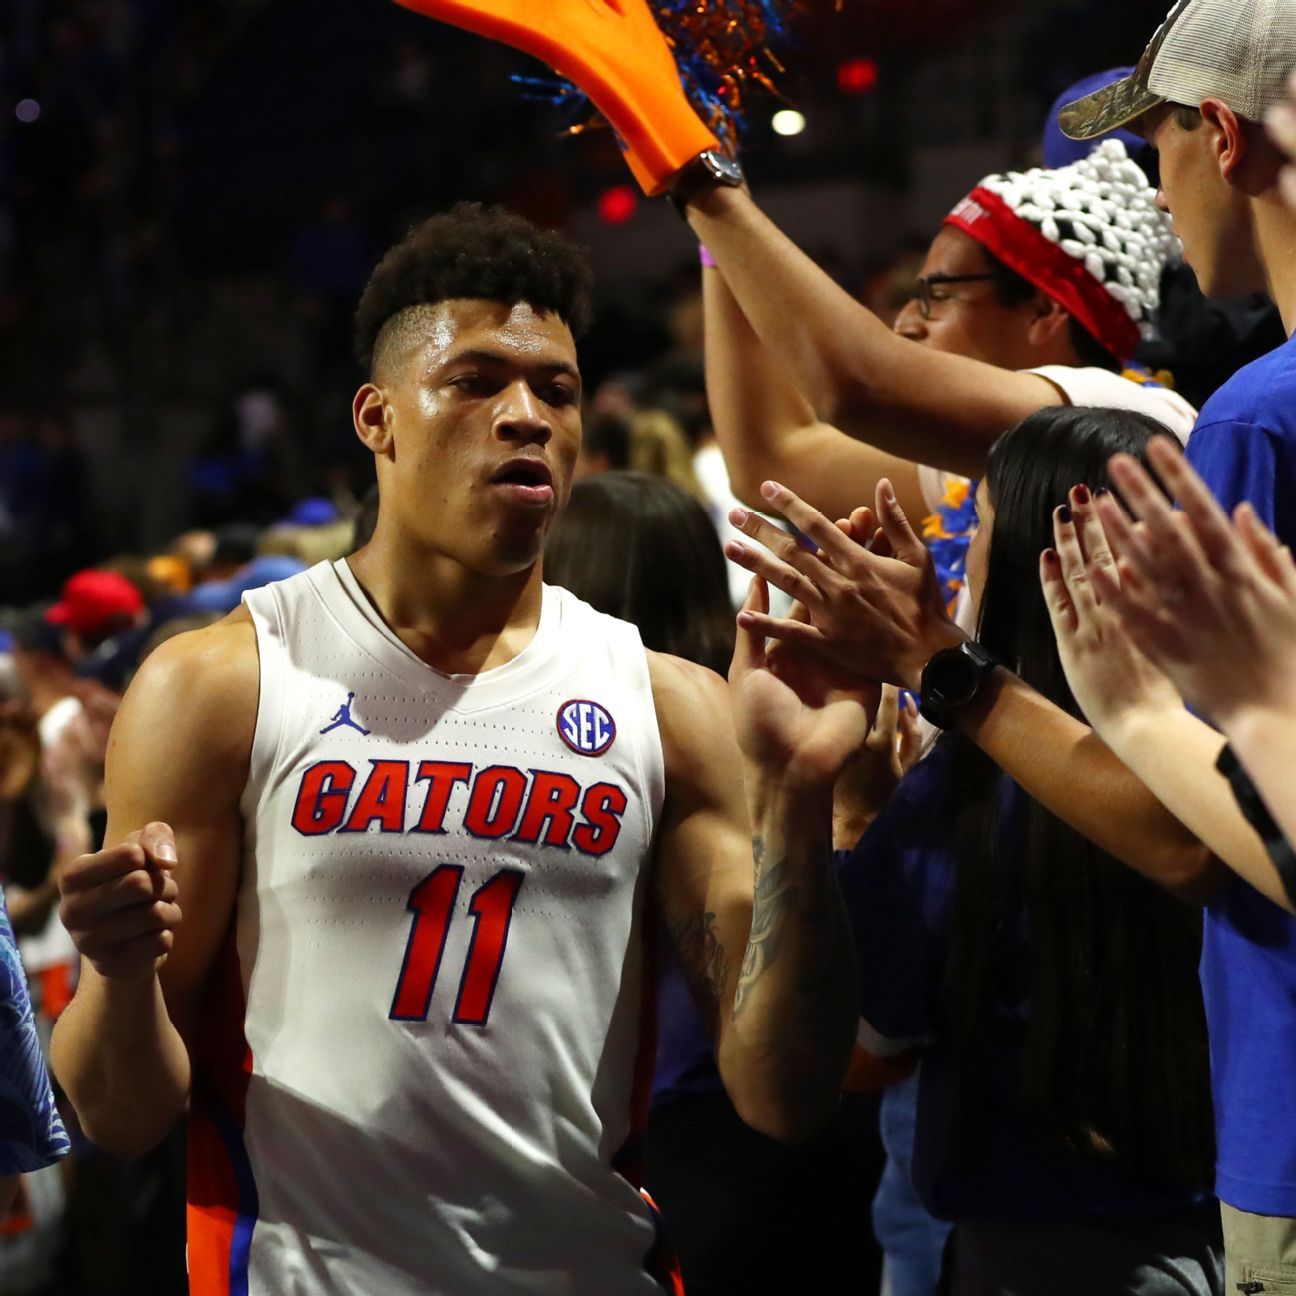 Florida Gators star Gionde Johnson has collapsed on court and is in a dangerous but stable condition